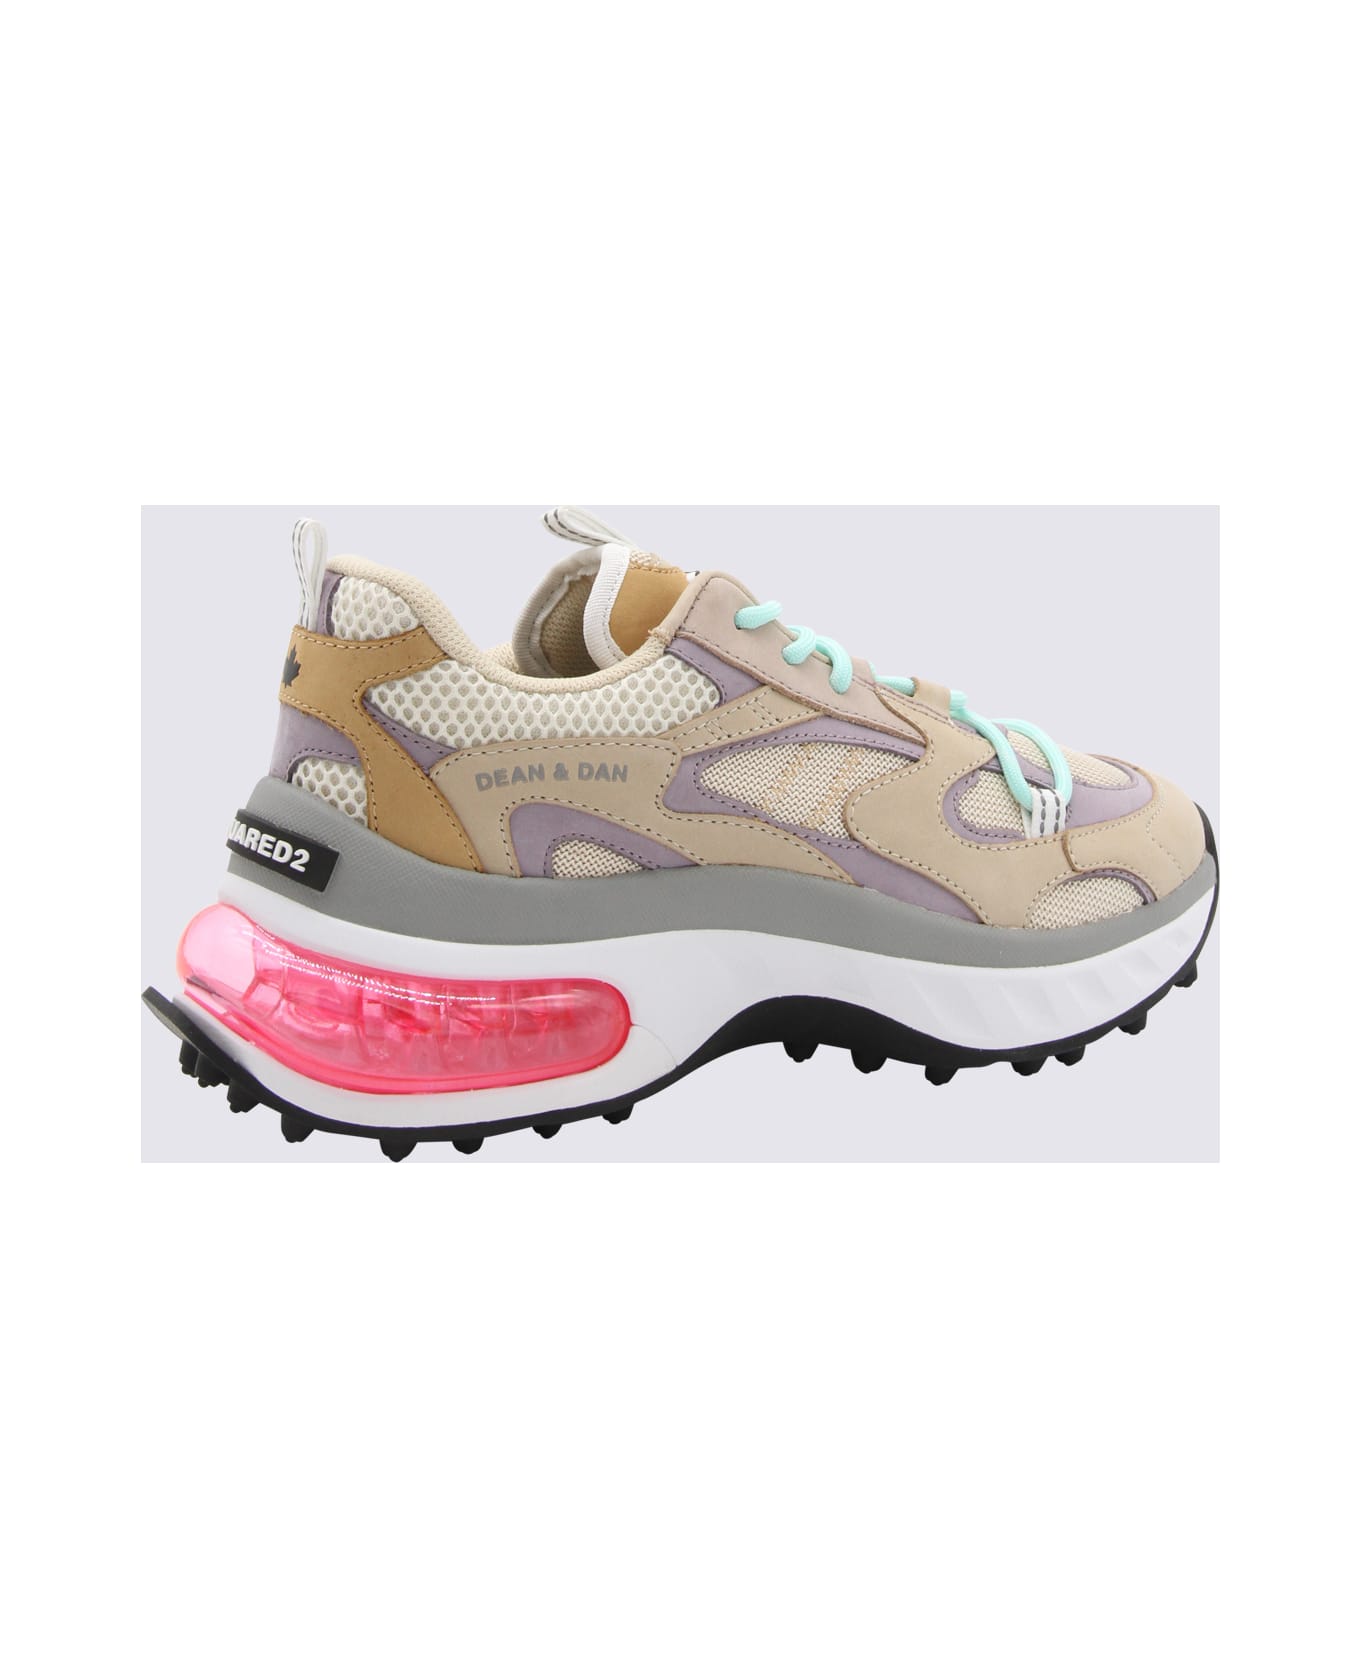 Dsquared2 Leather Sneakers - GREY/PINK/BEIGE